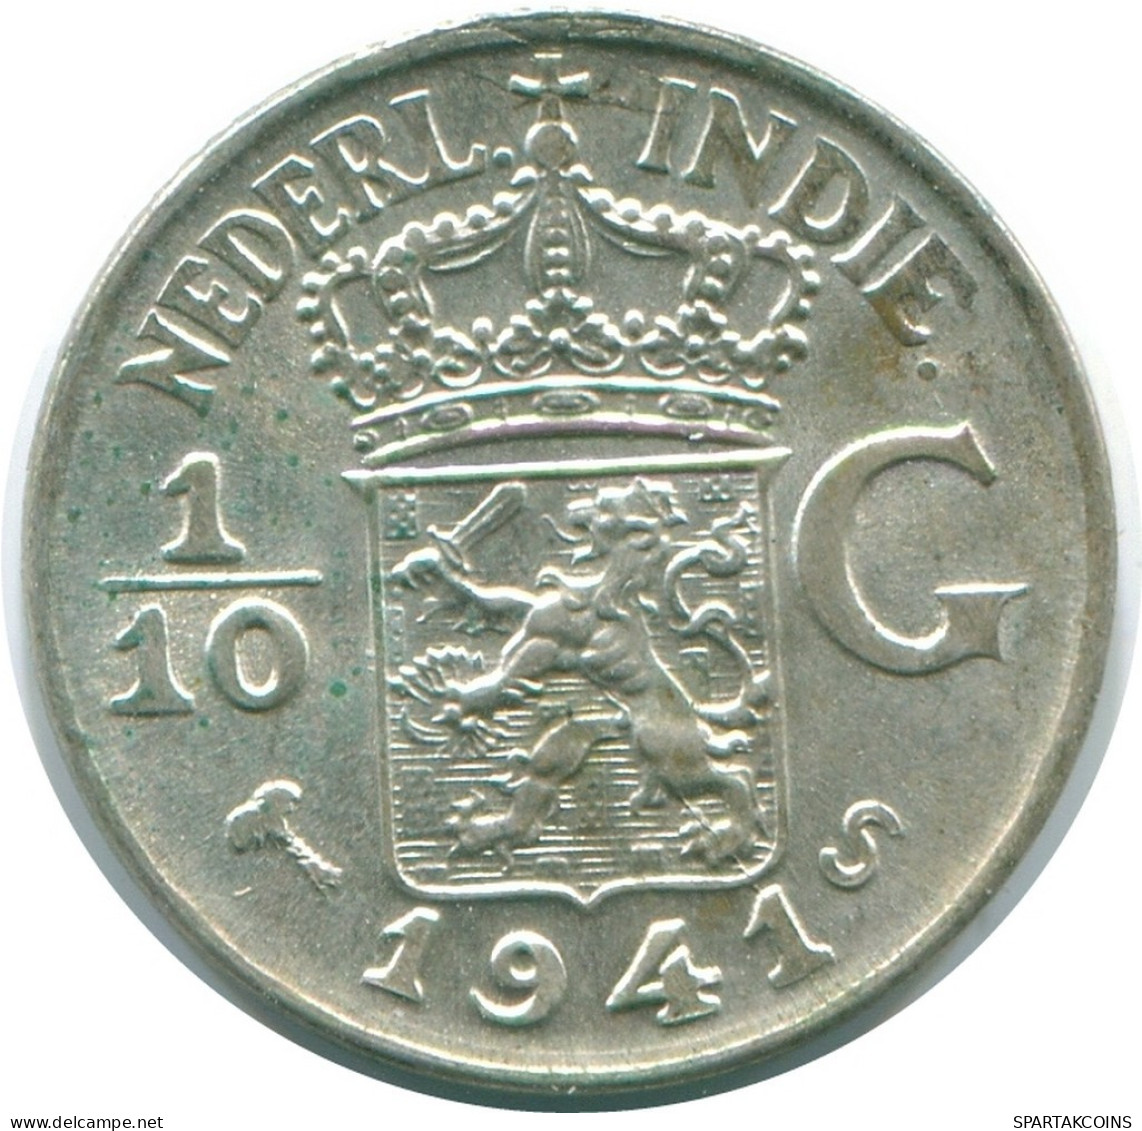 1/10 GULDEN 1941 S NETHERLANDS EAST INDIES SILVER Colonial Coin #NL13694.3.U.A - Indes Neerlandesas